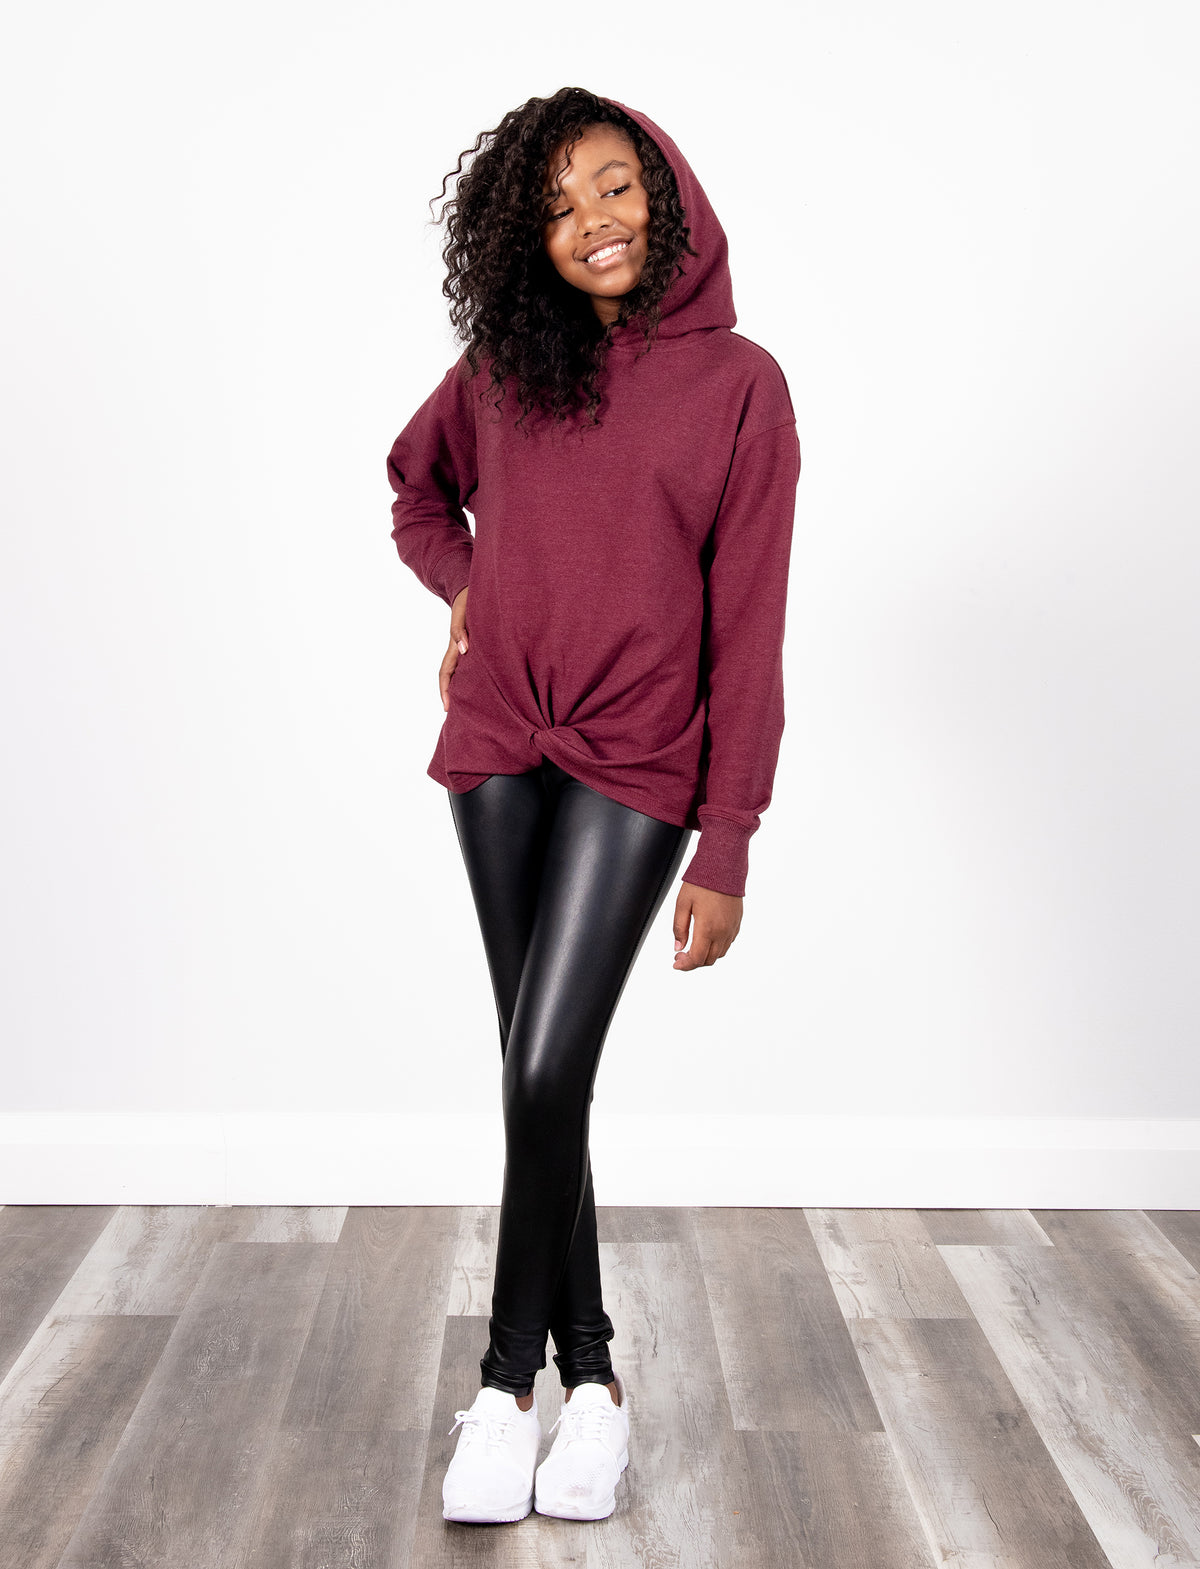 Choose one of our GIRLS LEATHER LIKE LEGGING Jill Yoga s to Find the Look  at an Affordable Cost